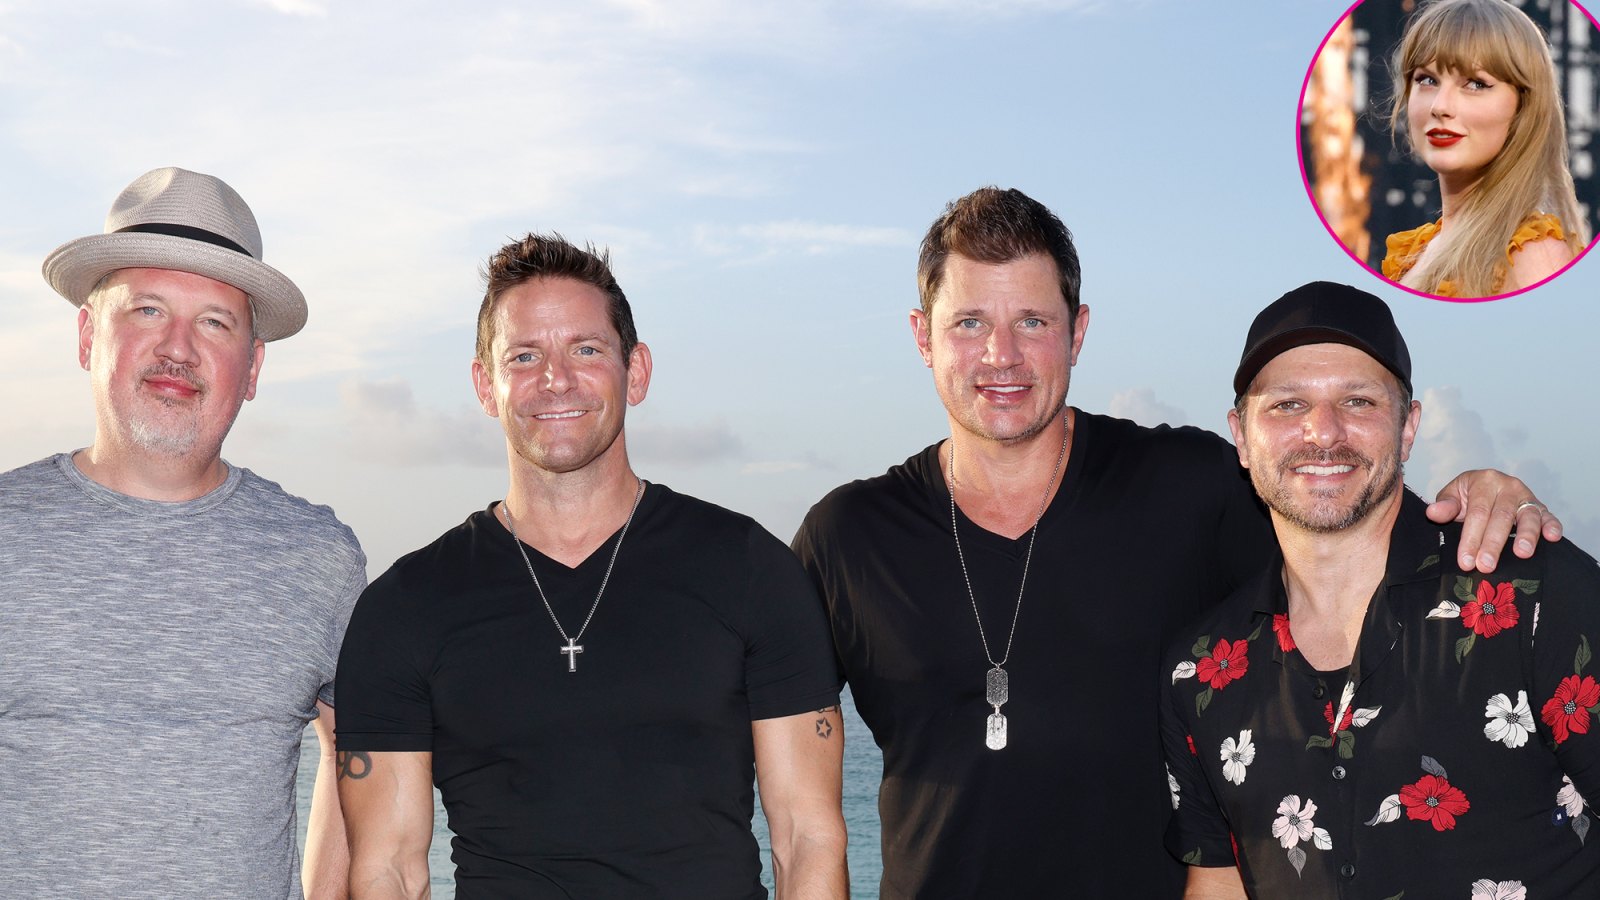 98 Degrees Says Taylor Swift Inspired Them to Rerecord Their Music